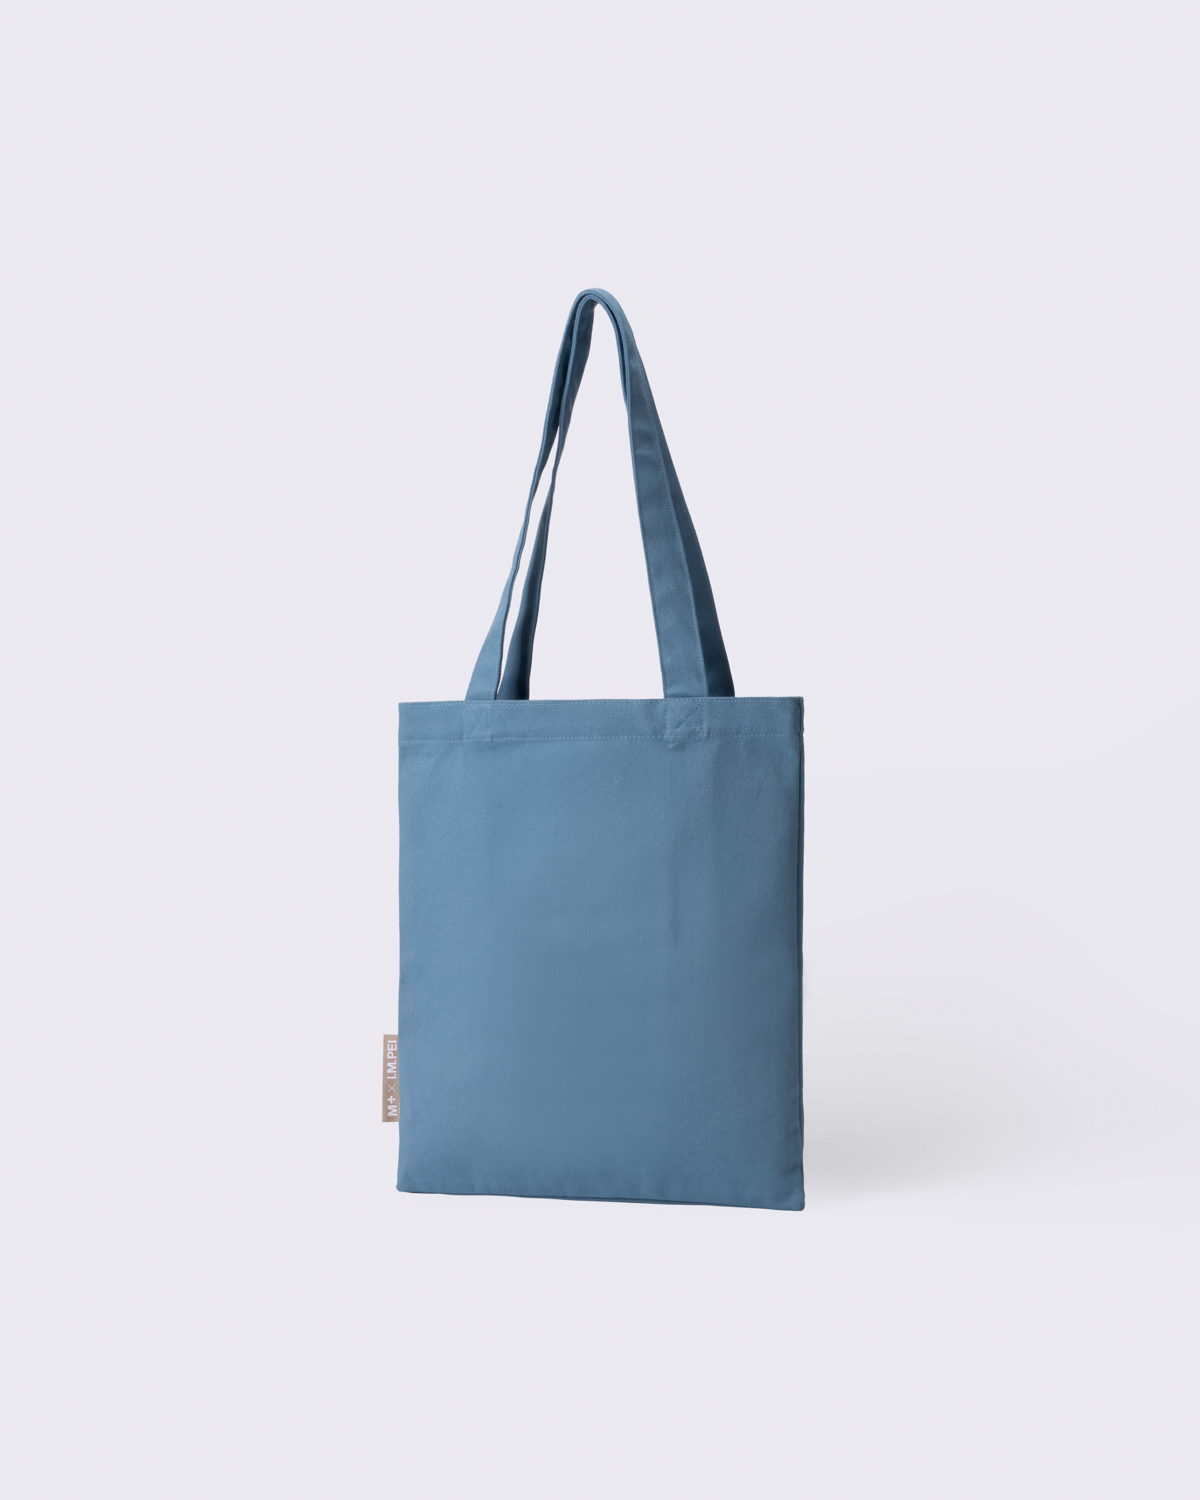 I.M.PEI, TOTE BAG, EXPO, Blue/The Republic of China Pavilion In Expo70, large